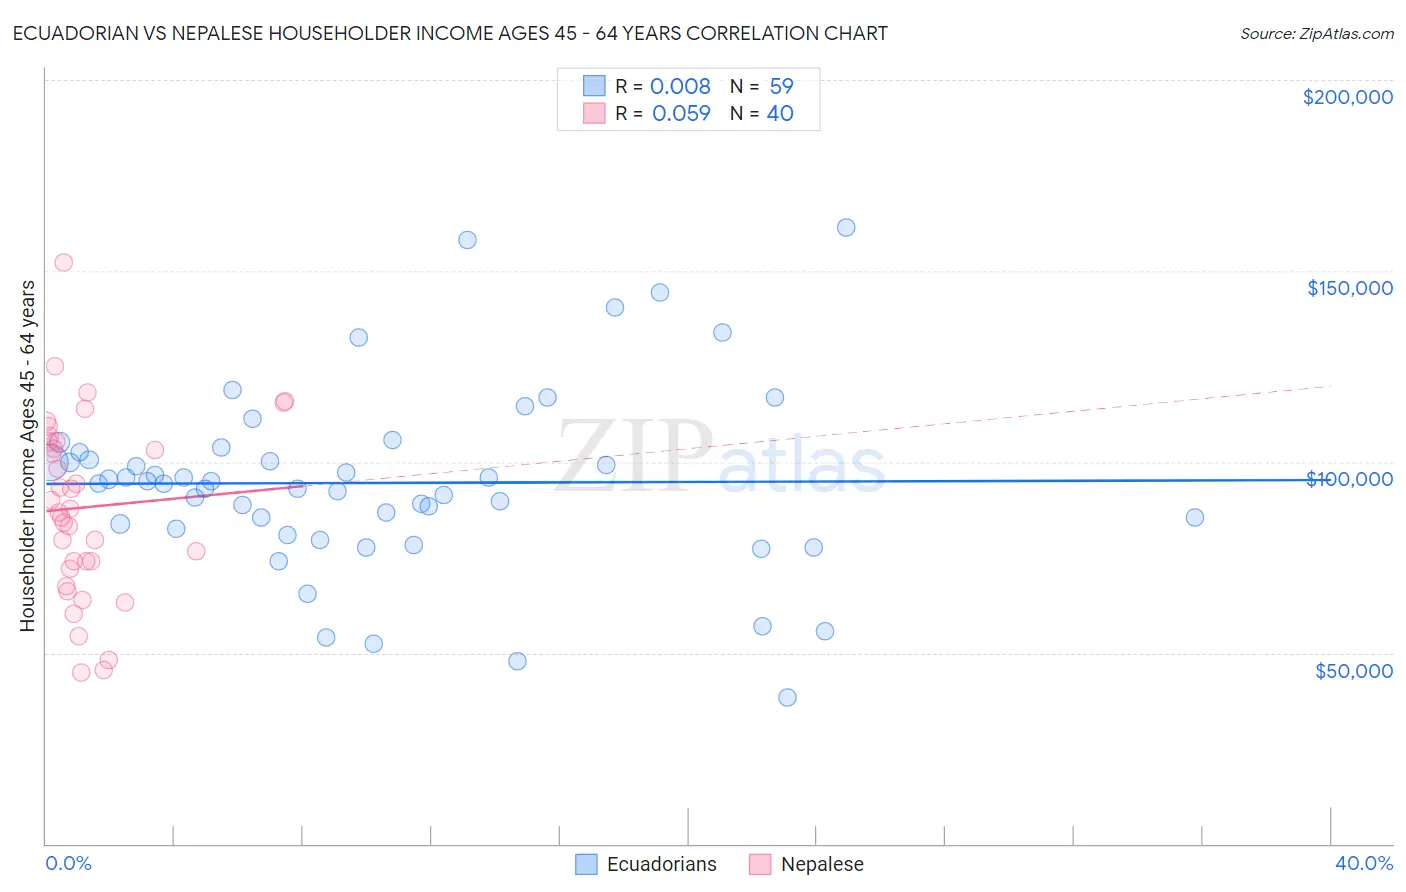 Ecuadorian vs Nepalese Householder Income Ages 45 - 64 years